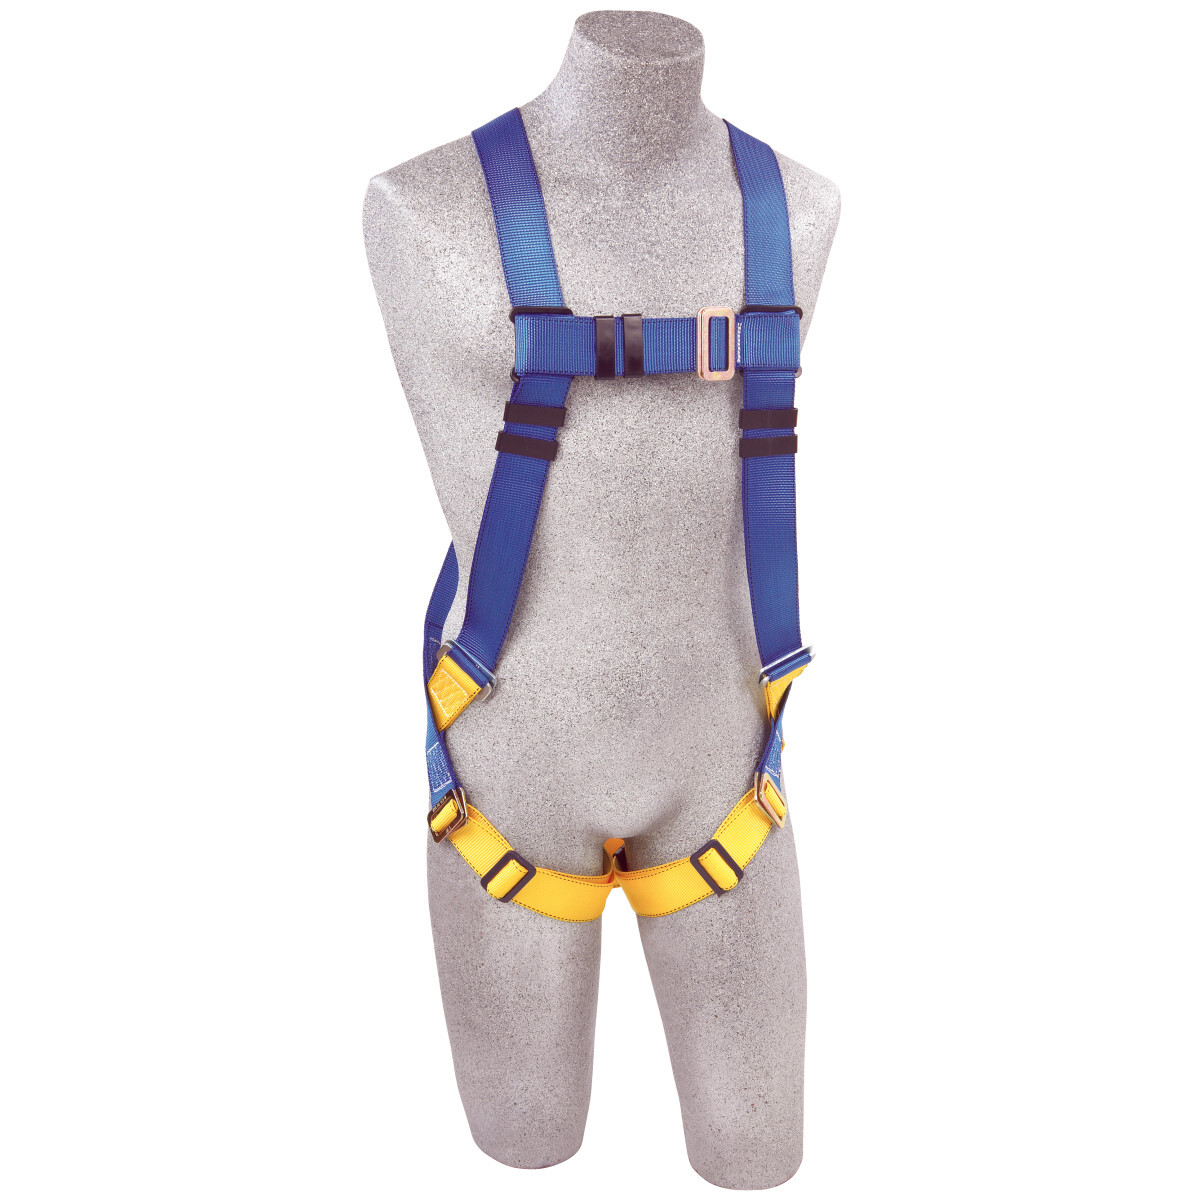 3M™ DBI-SALA® Universal PROTECTA® FIRST™ Full Body Style 5-Point Harness With Back D-Ring And Pass-Thru Leg Strap Buckle